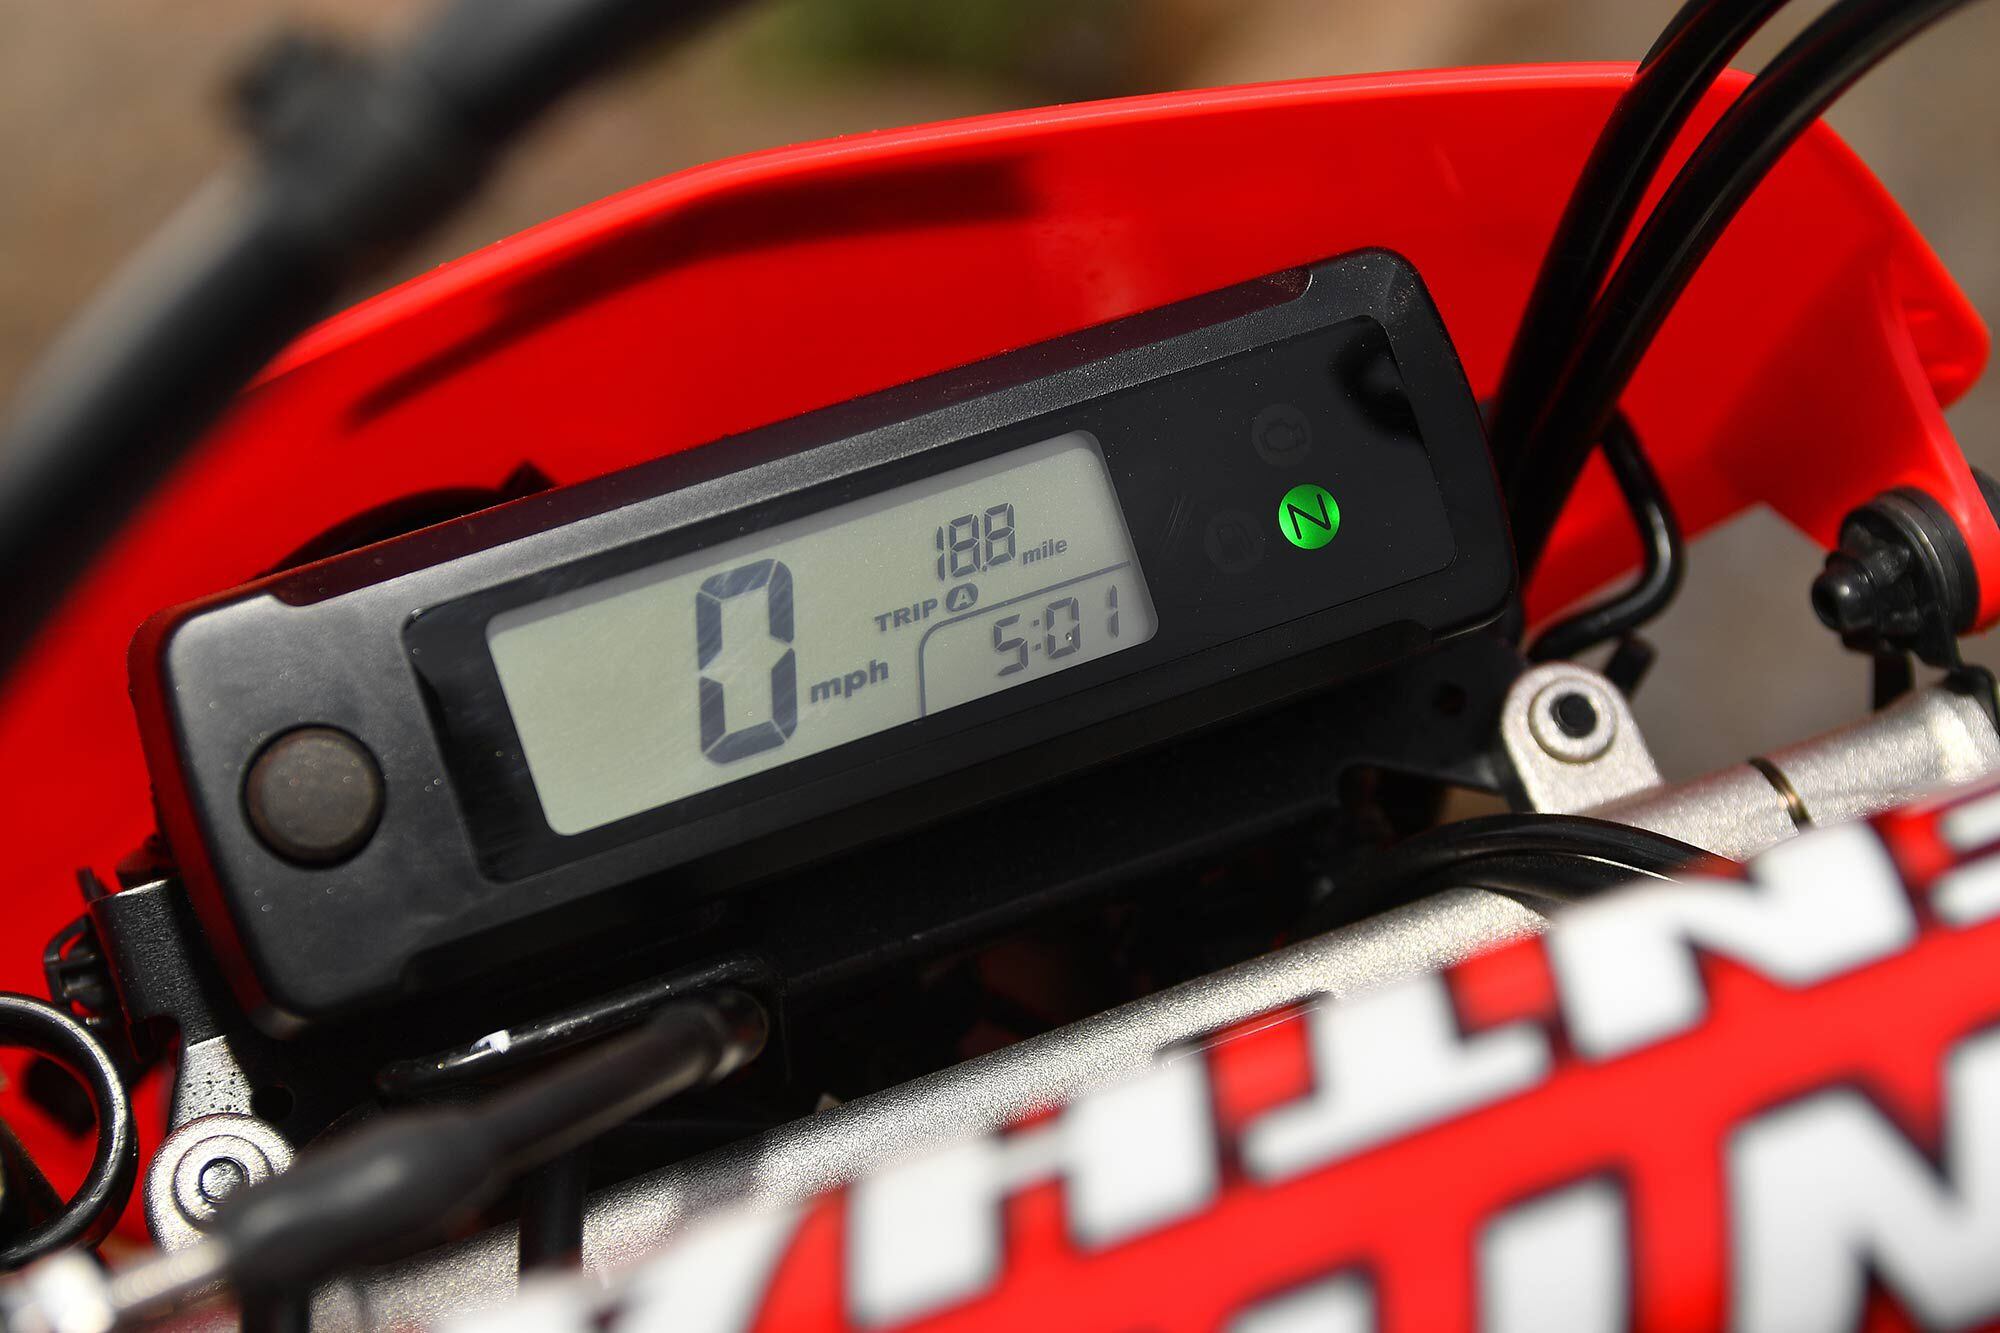 The compact digital meter is easy to read and the harness keeps the controls in their respective positions: upper front brake line guide on the left, throttle cables on the right, with the clutch cable and starting wires right down the middle.